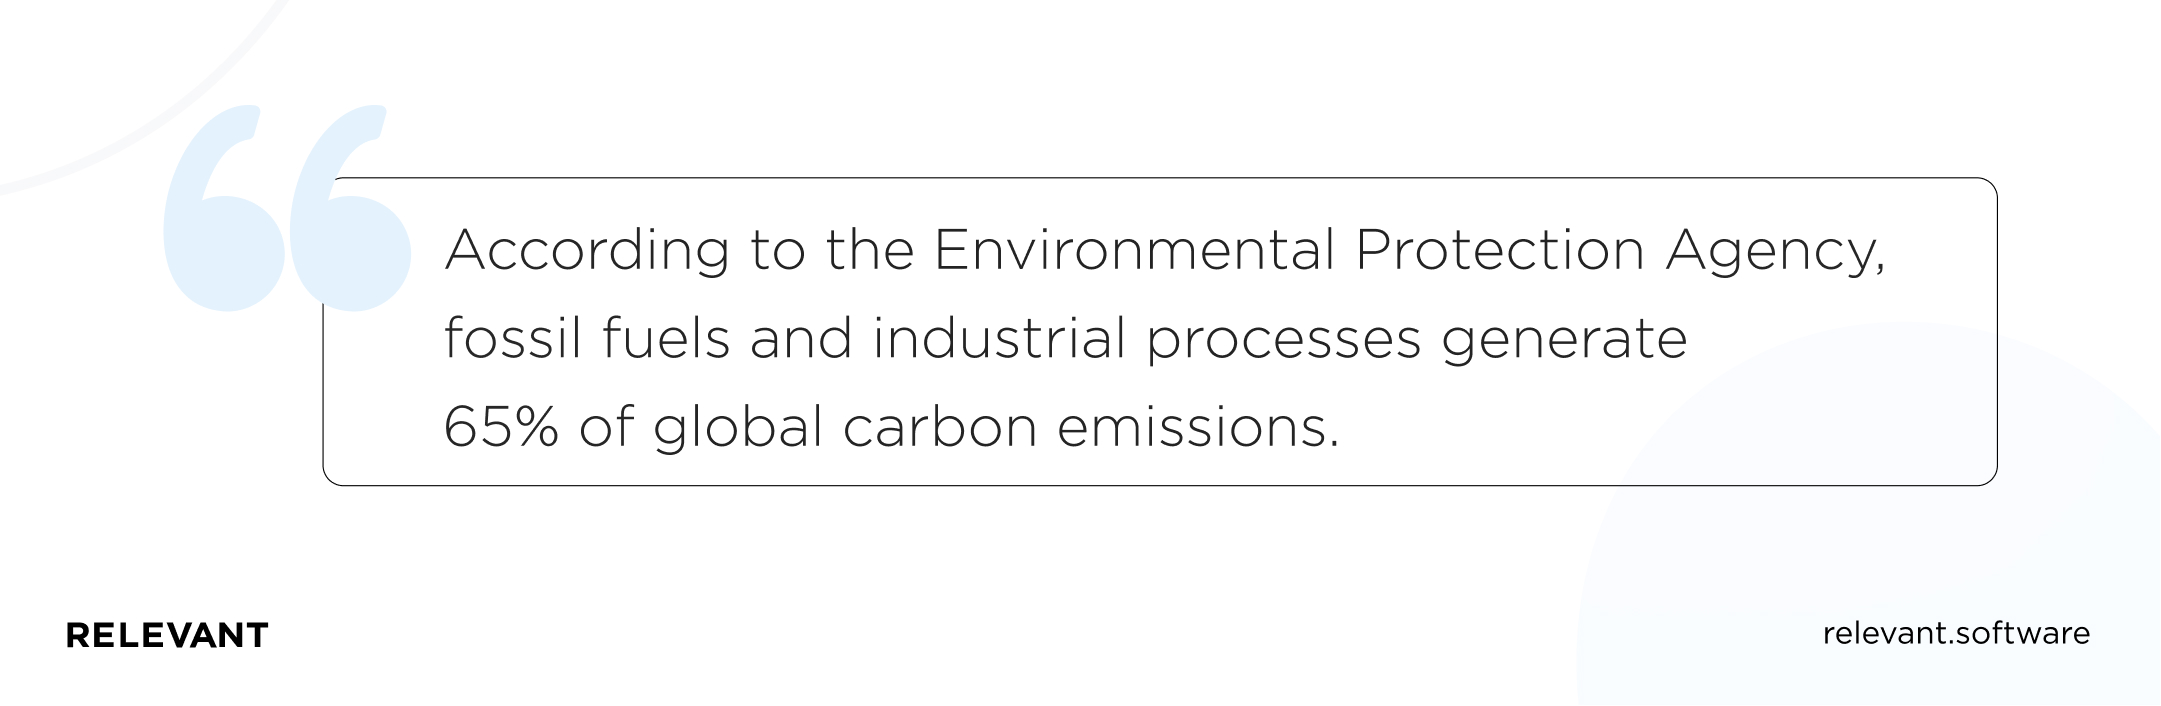 According to the Environmental Protection Agency, fossil fuels and industrial processes generate 65% of global carbon emissions.